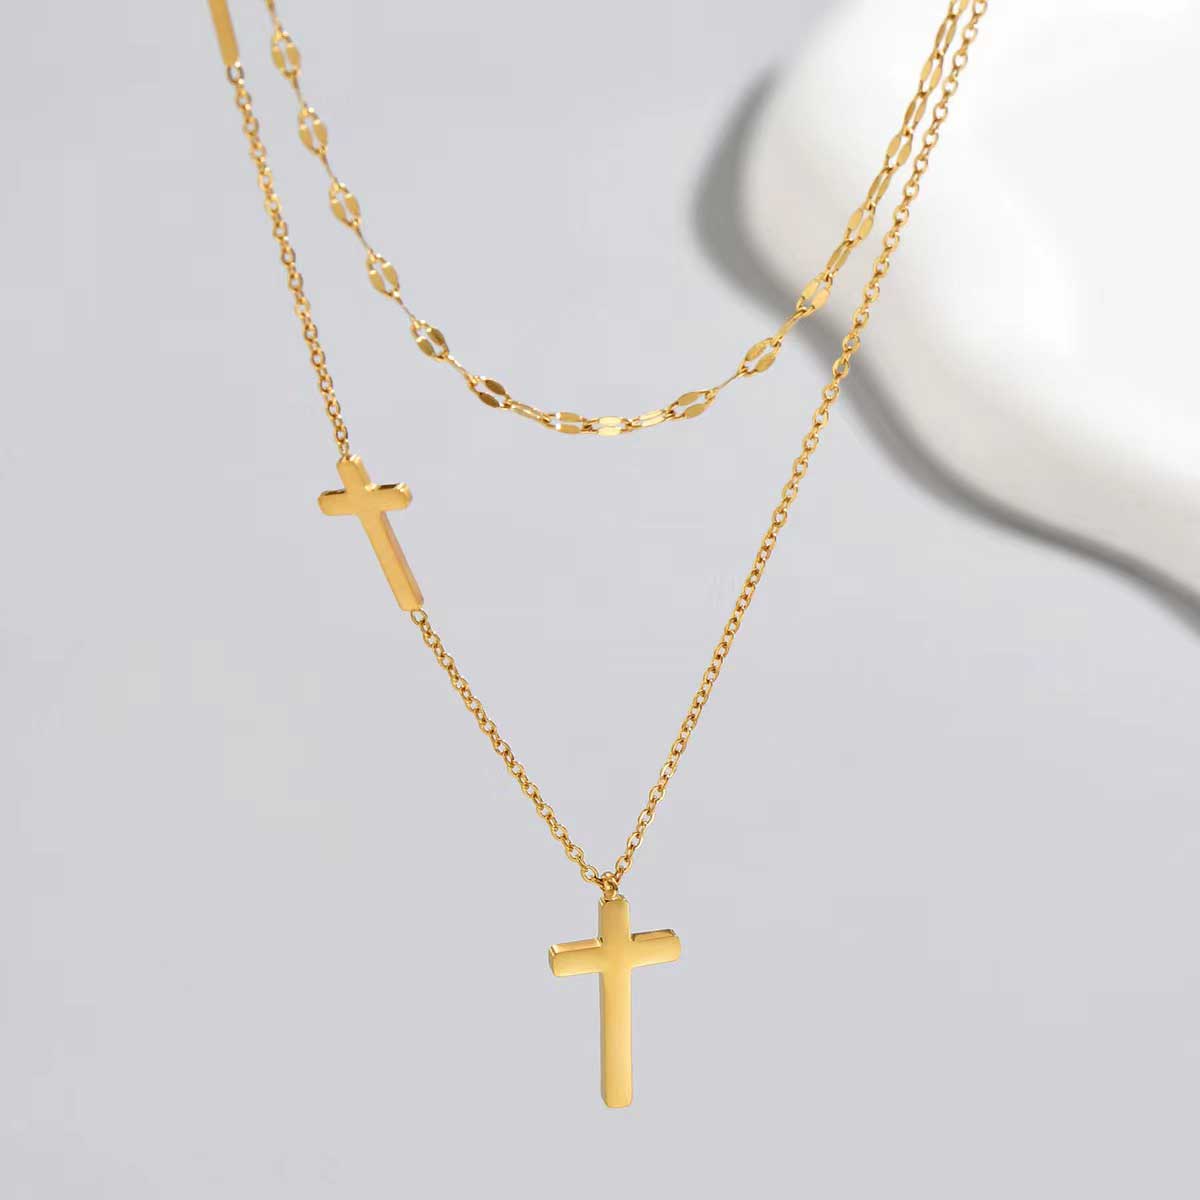 Layered Golden Cross Design Alloy Necklace